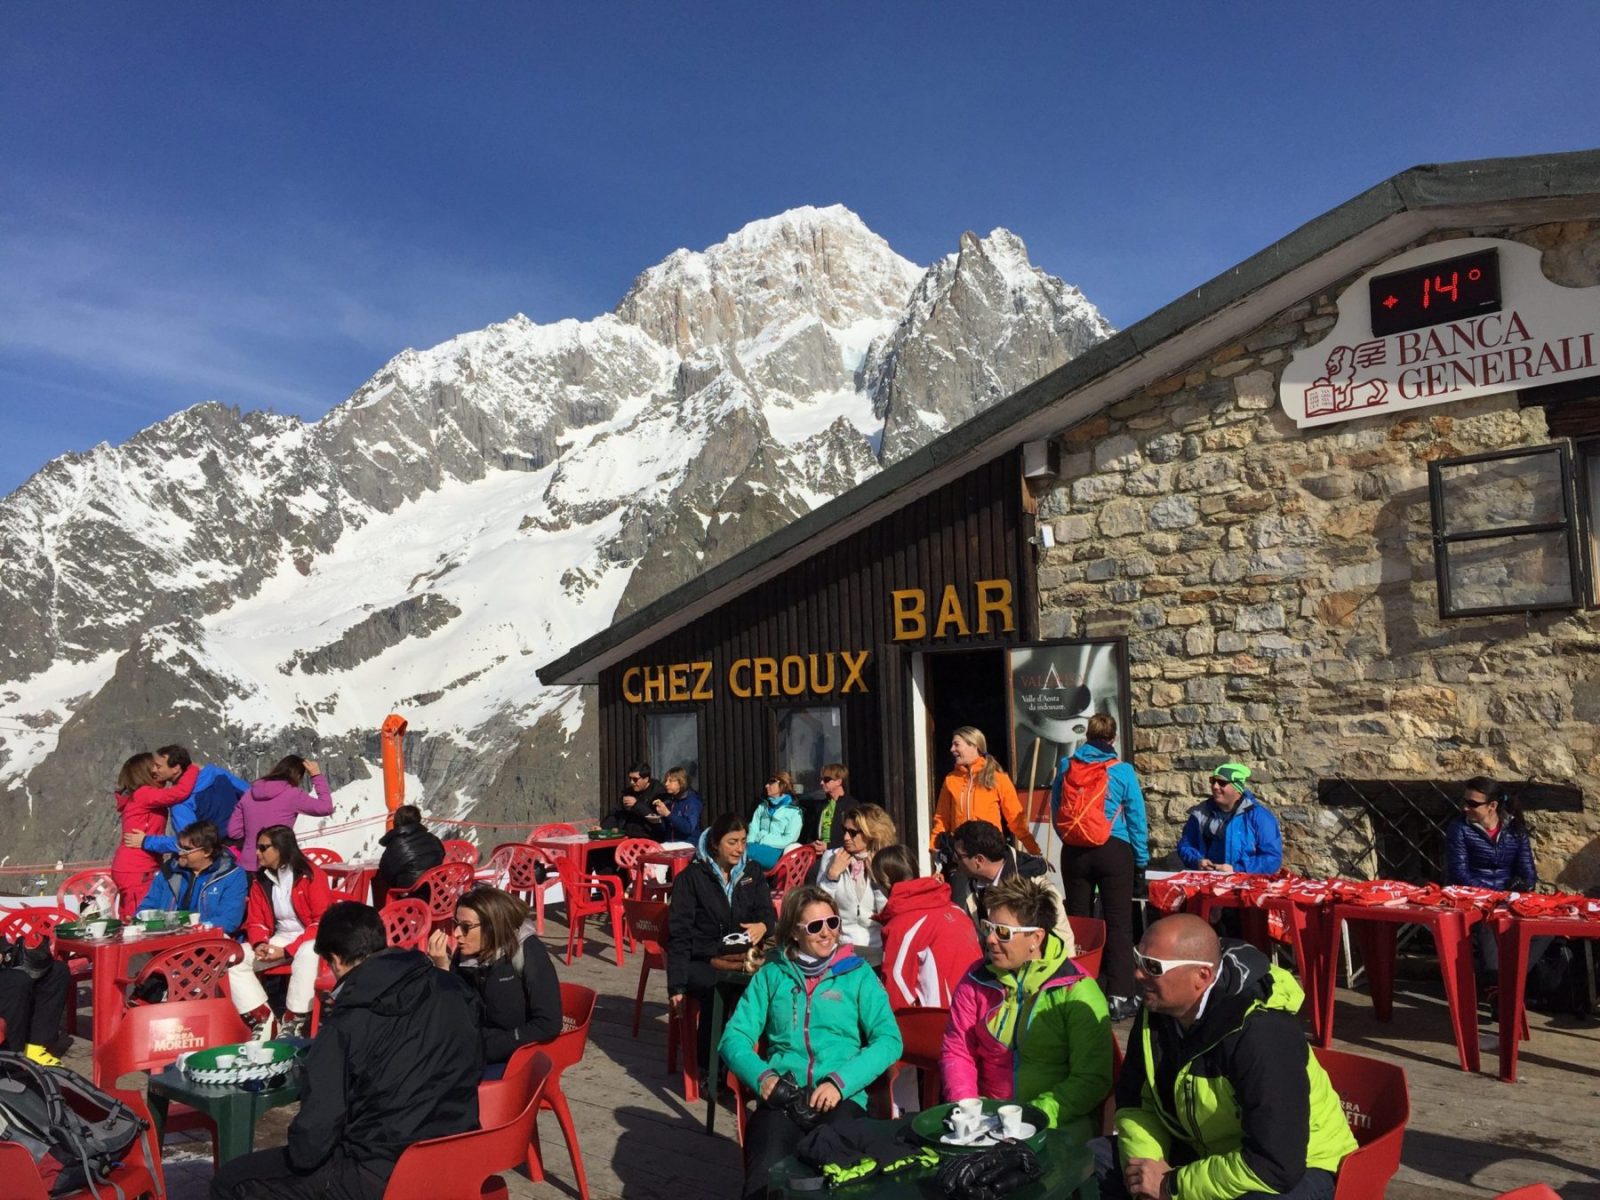 Chez Croux's terrace. Views of Monte Bianco behind. A Foodie Guide to on-Mountain Dining in Courmayeur. 